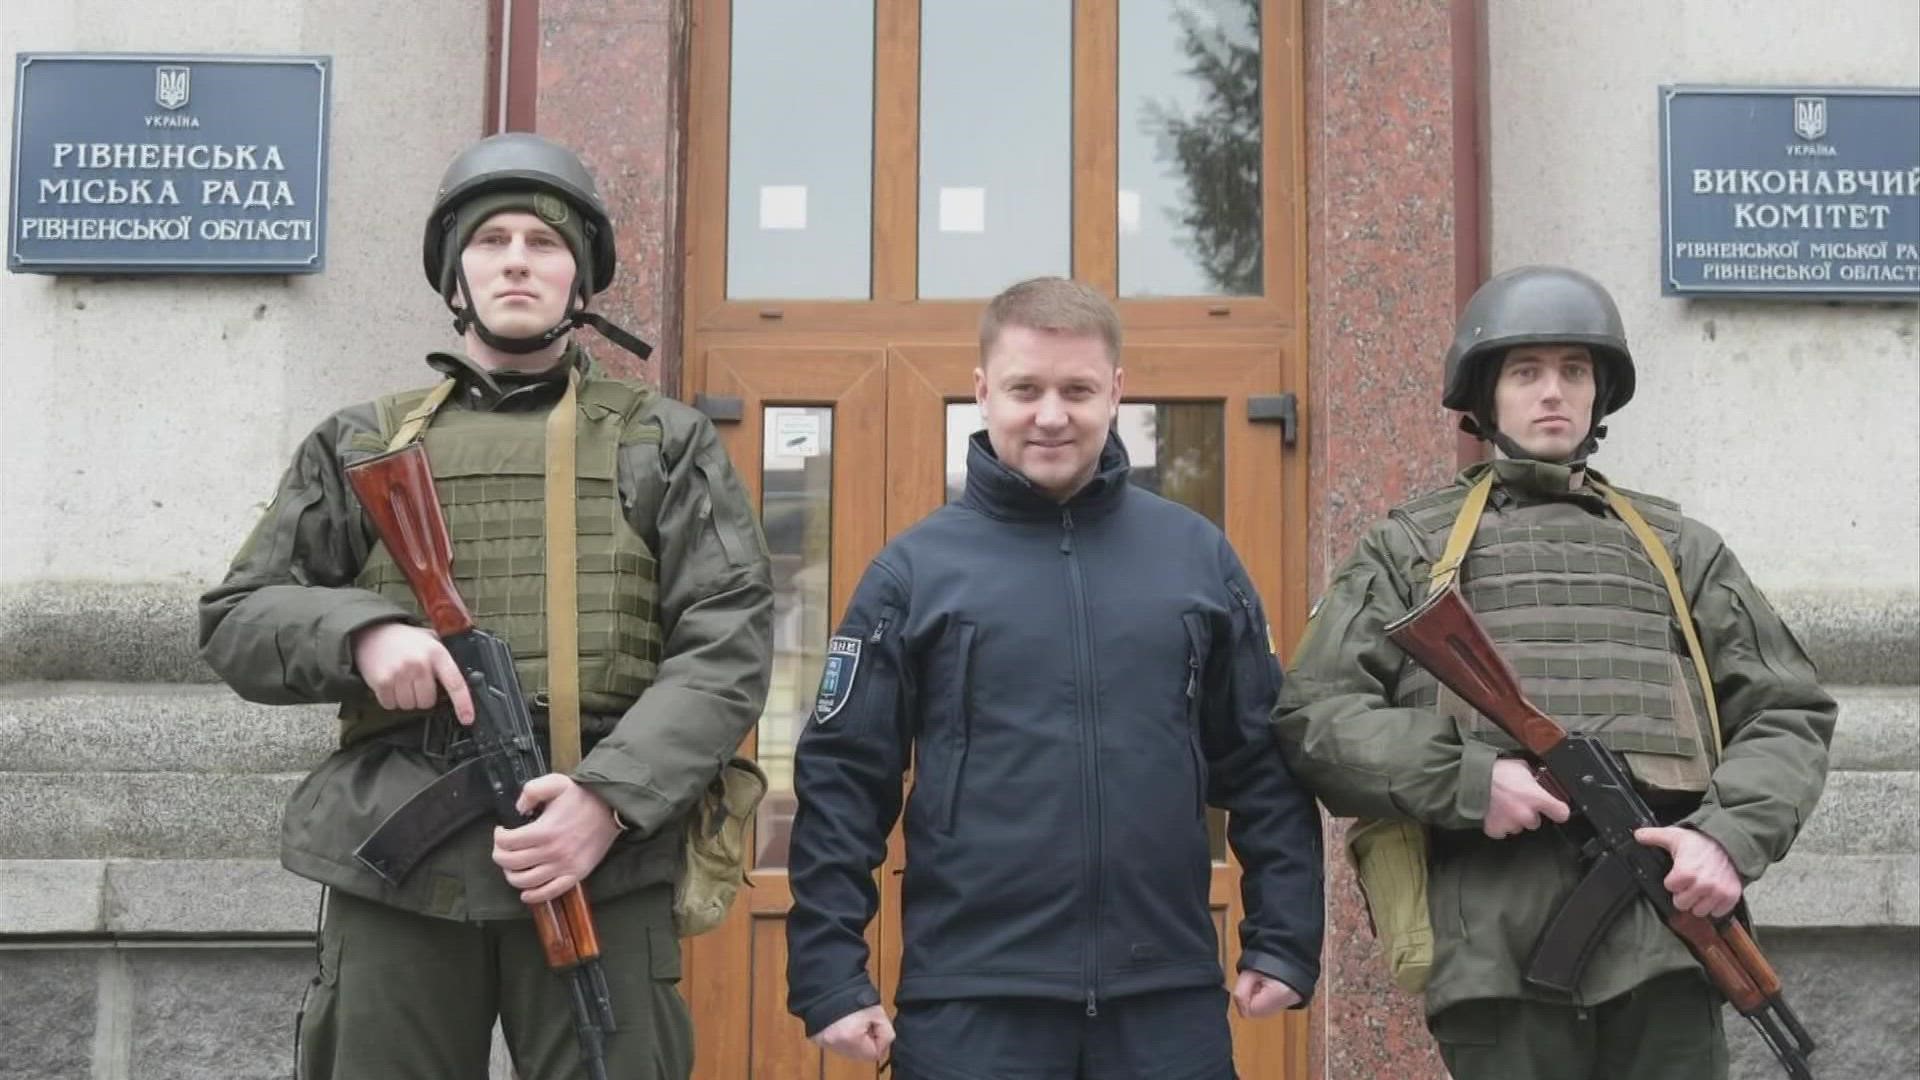 Oleksandr Tretyak, the mayor of Rivne, says he and his people will defend the city if they come to their streets.